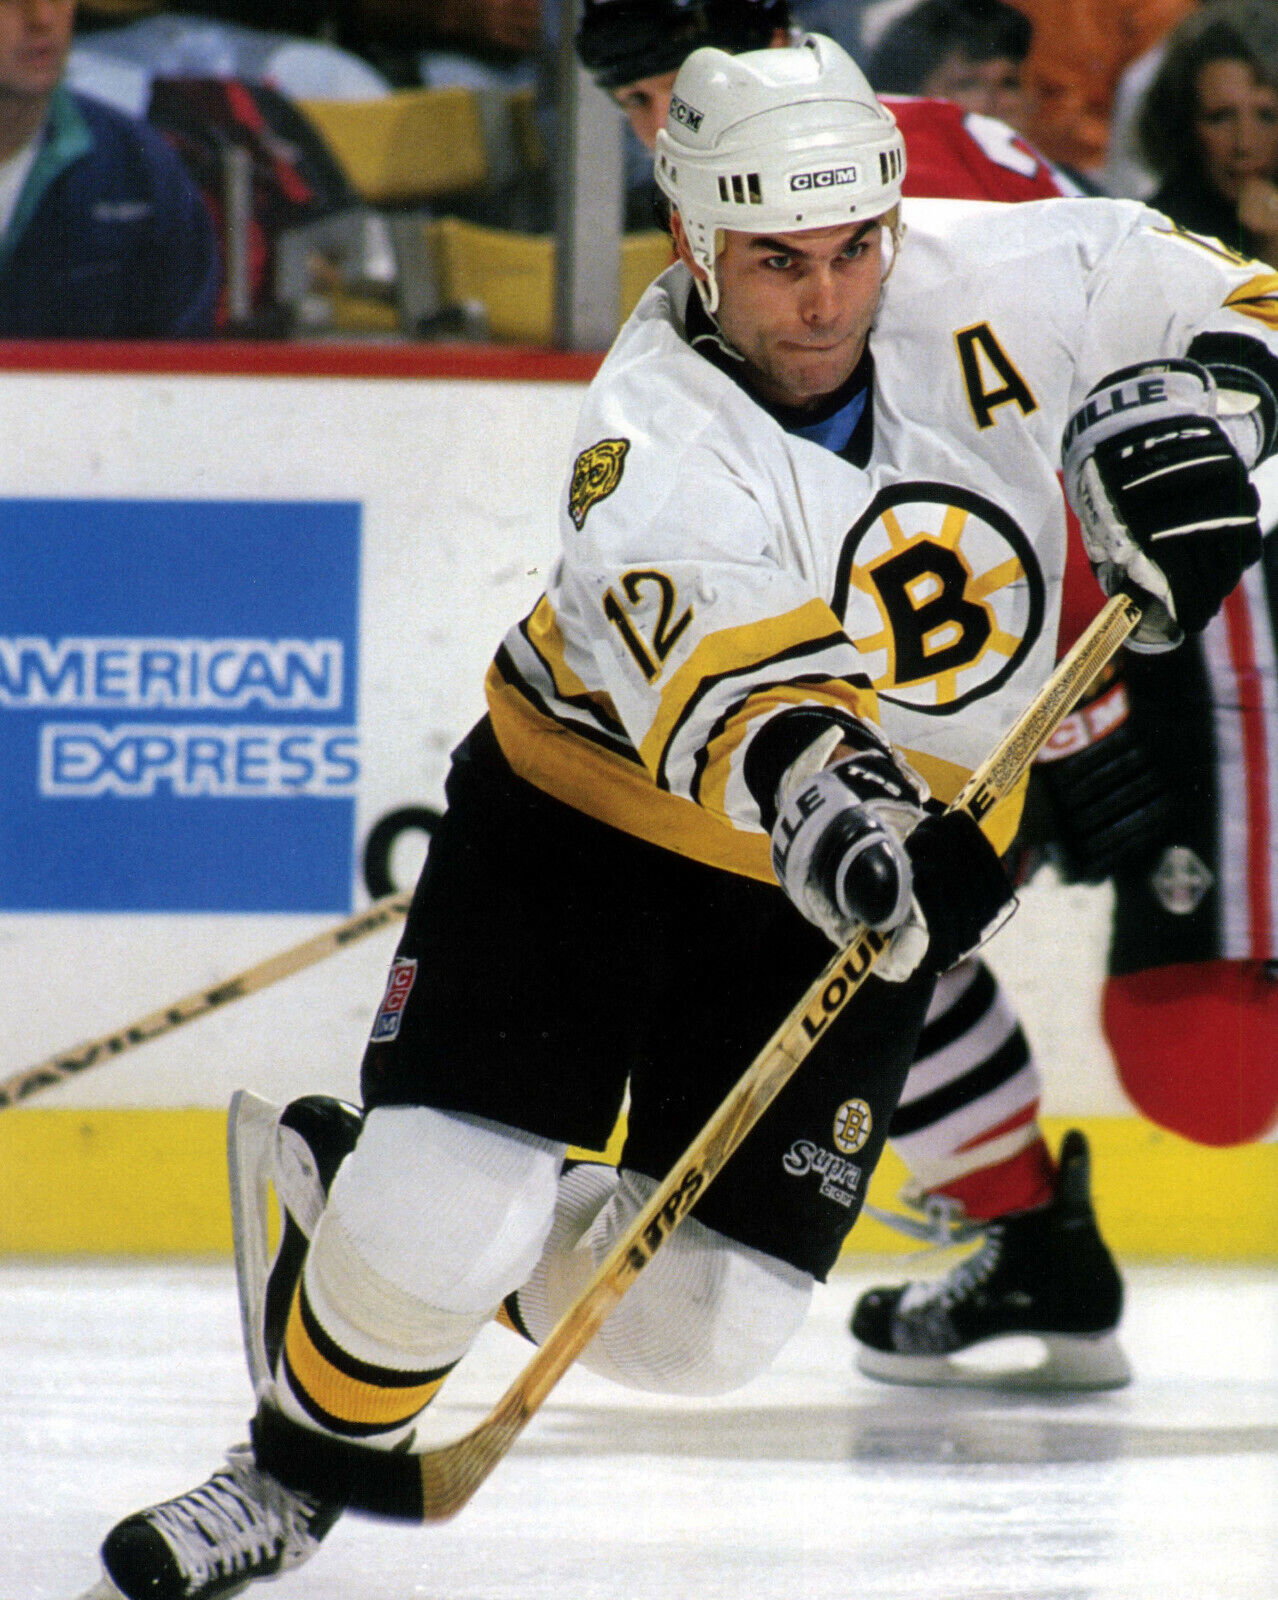 Adam Oates of the Boston Bruins skates on the ice during an NHL game